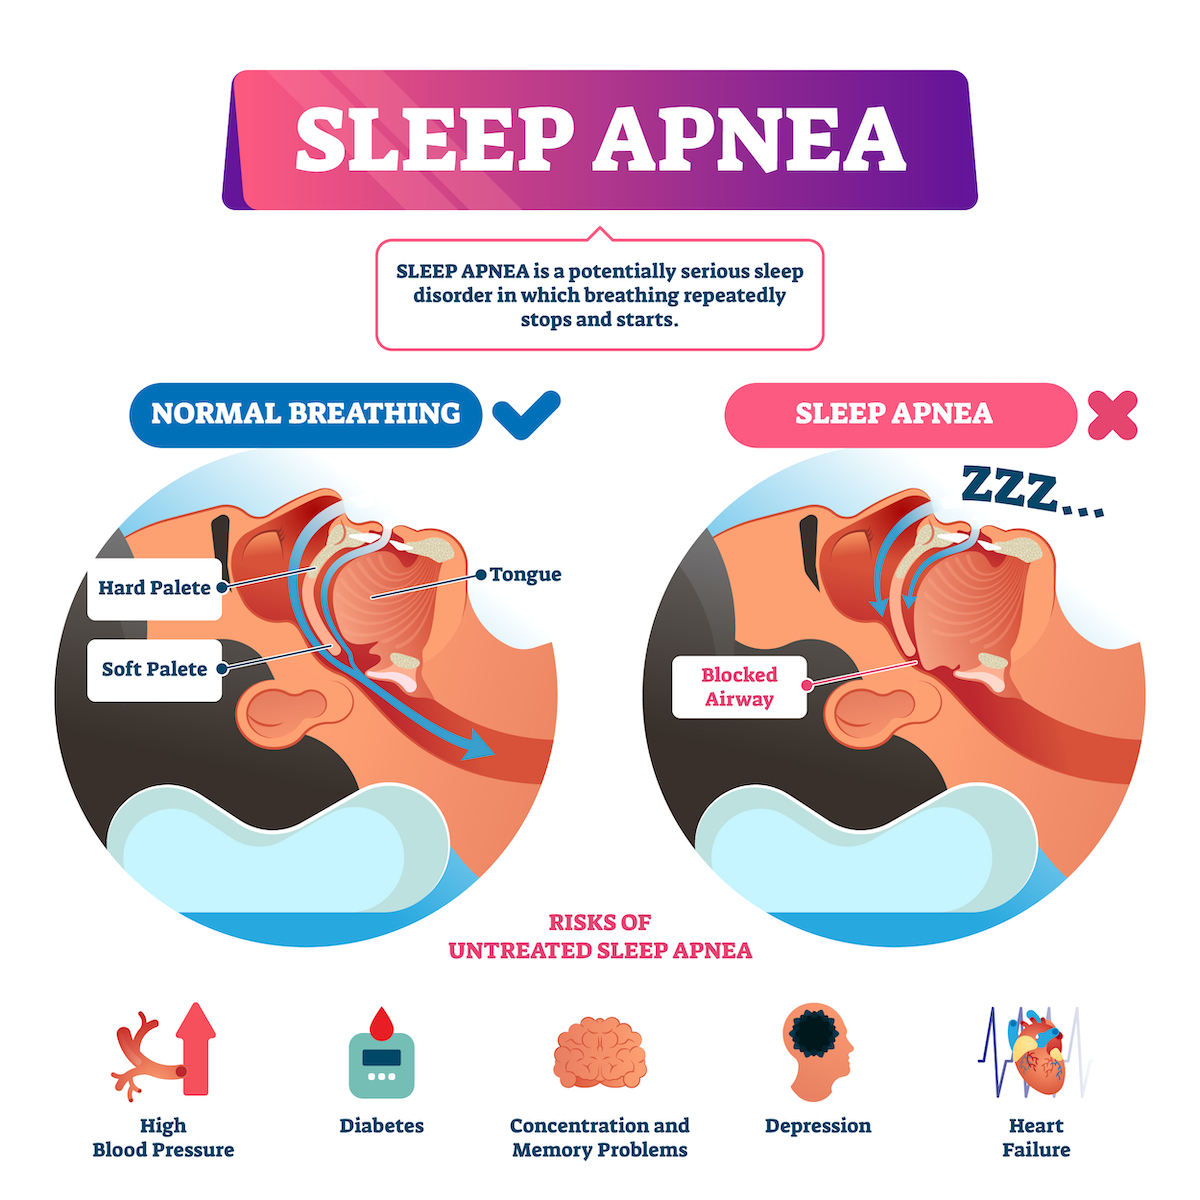 Sleep apnea vector illustration. Labeled nasal tongue blocked airway scheme. Diagram with normal and abnormal breathing comparison. Respiratory problem symptoms with list of untreated diagnosis risks.